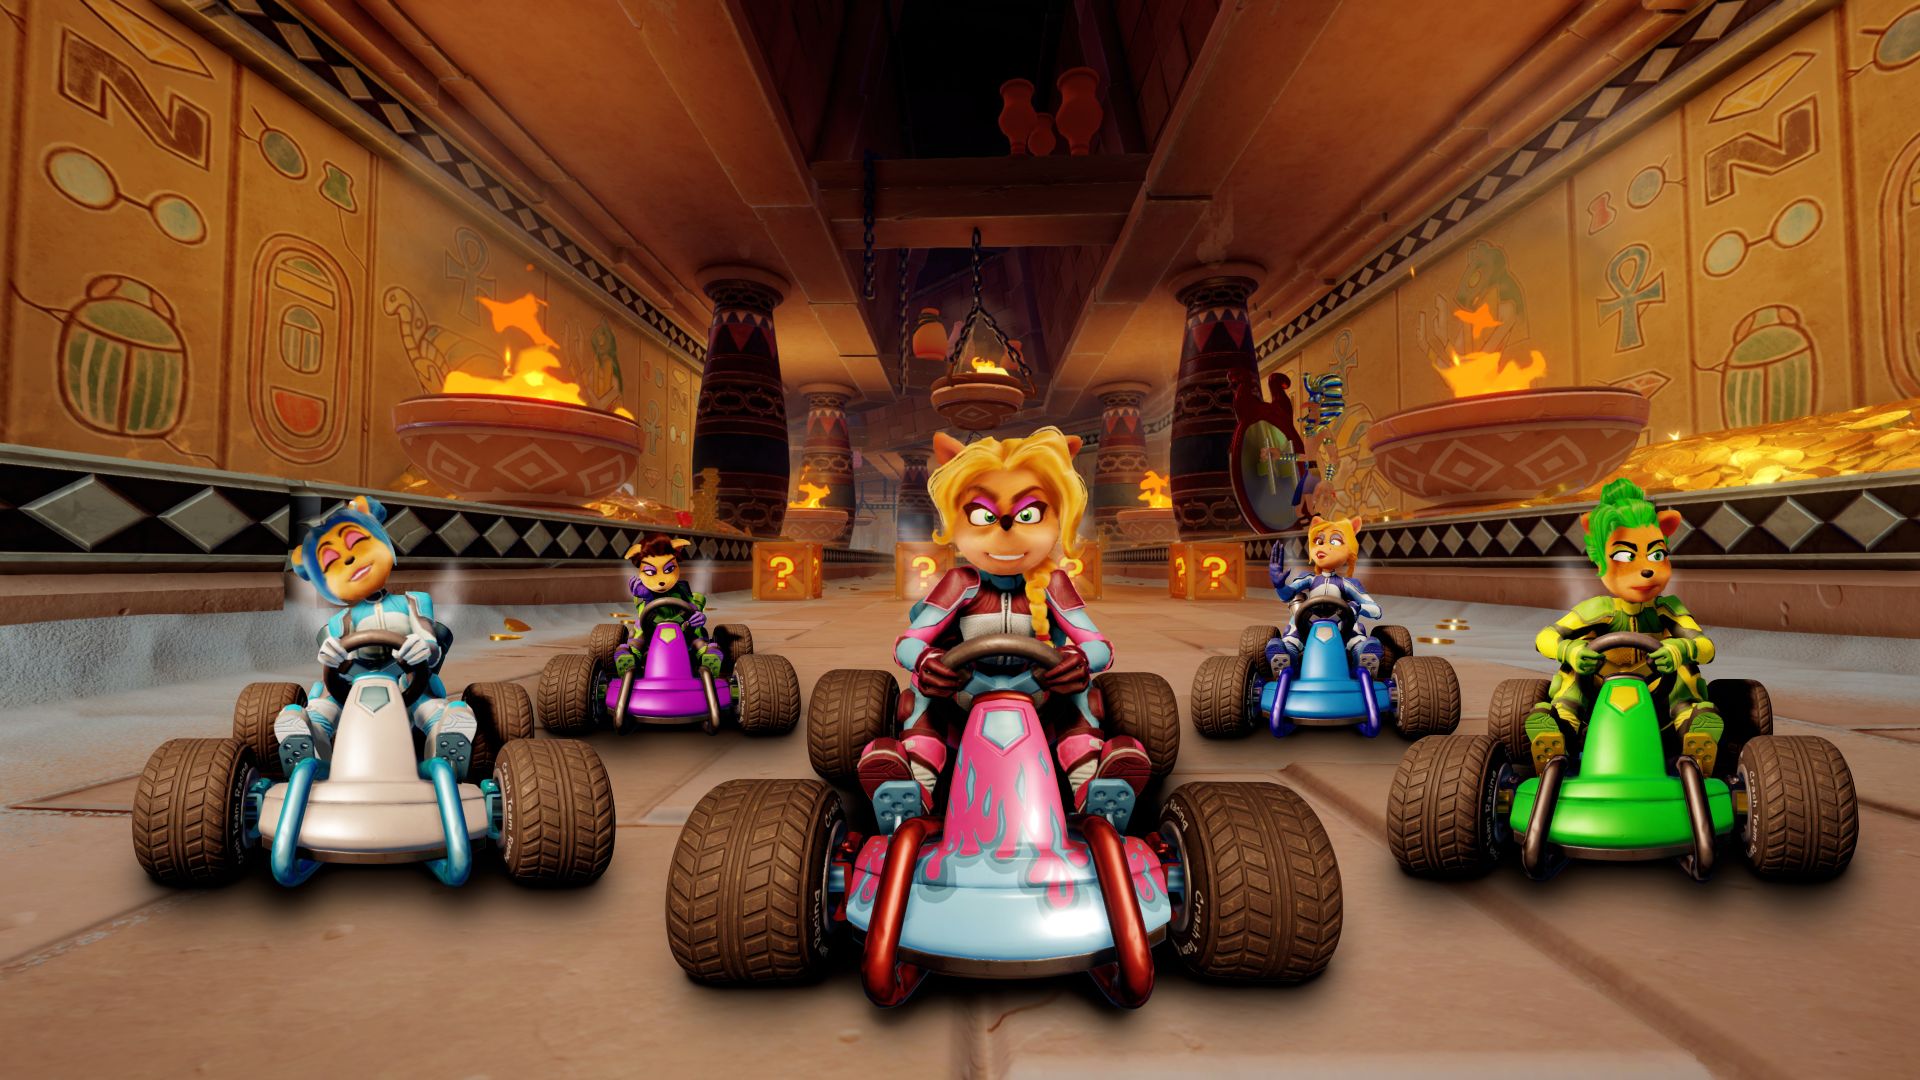 Best Switch racing games: Several racers from Crash Team Racing line up